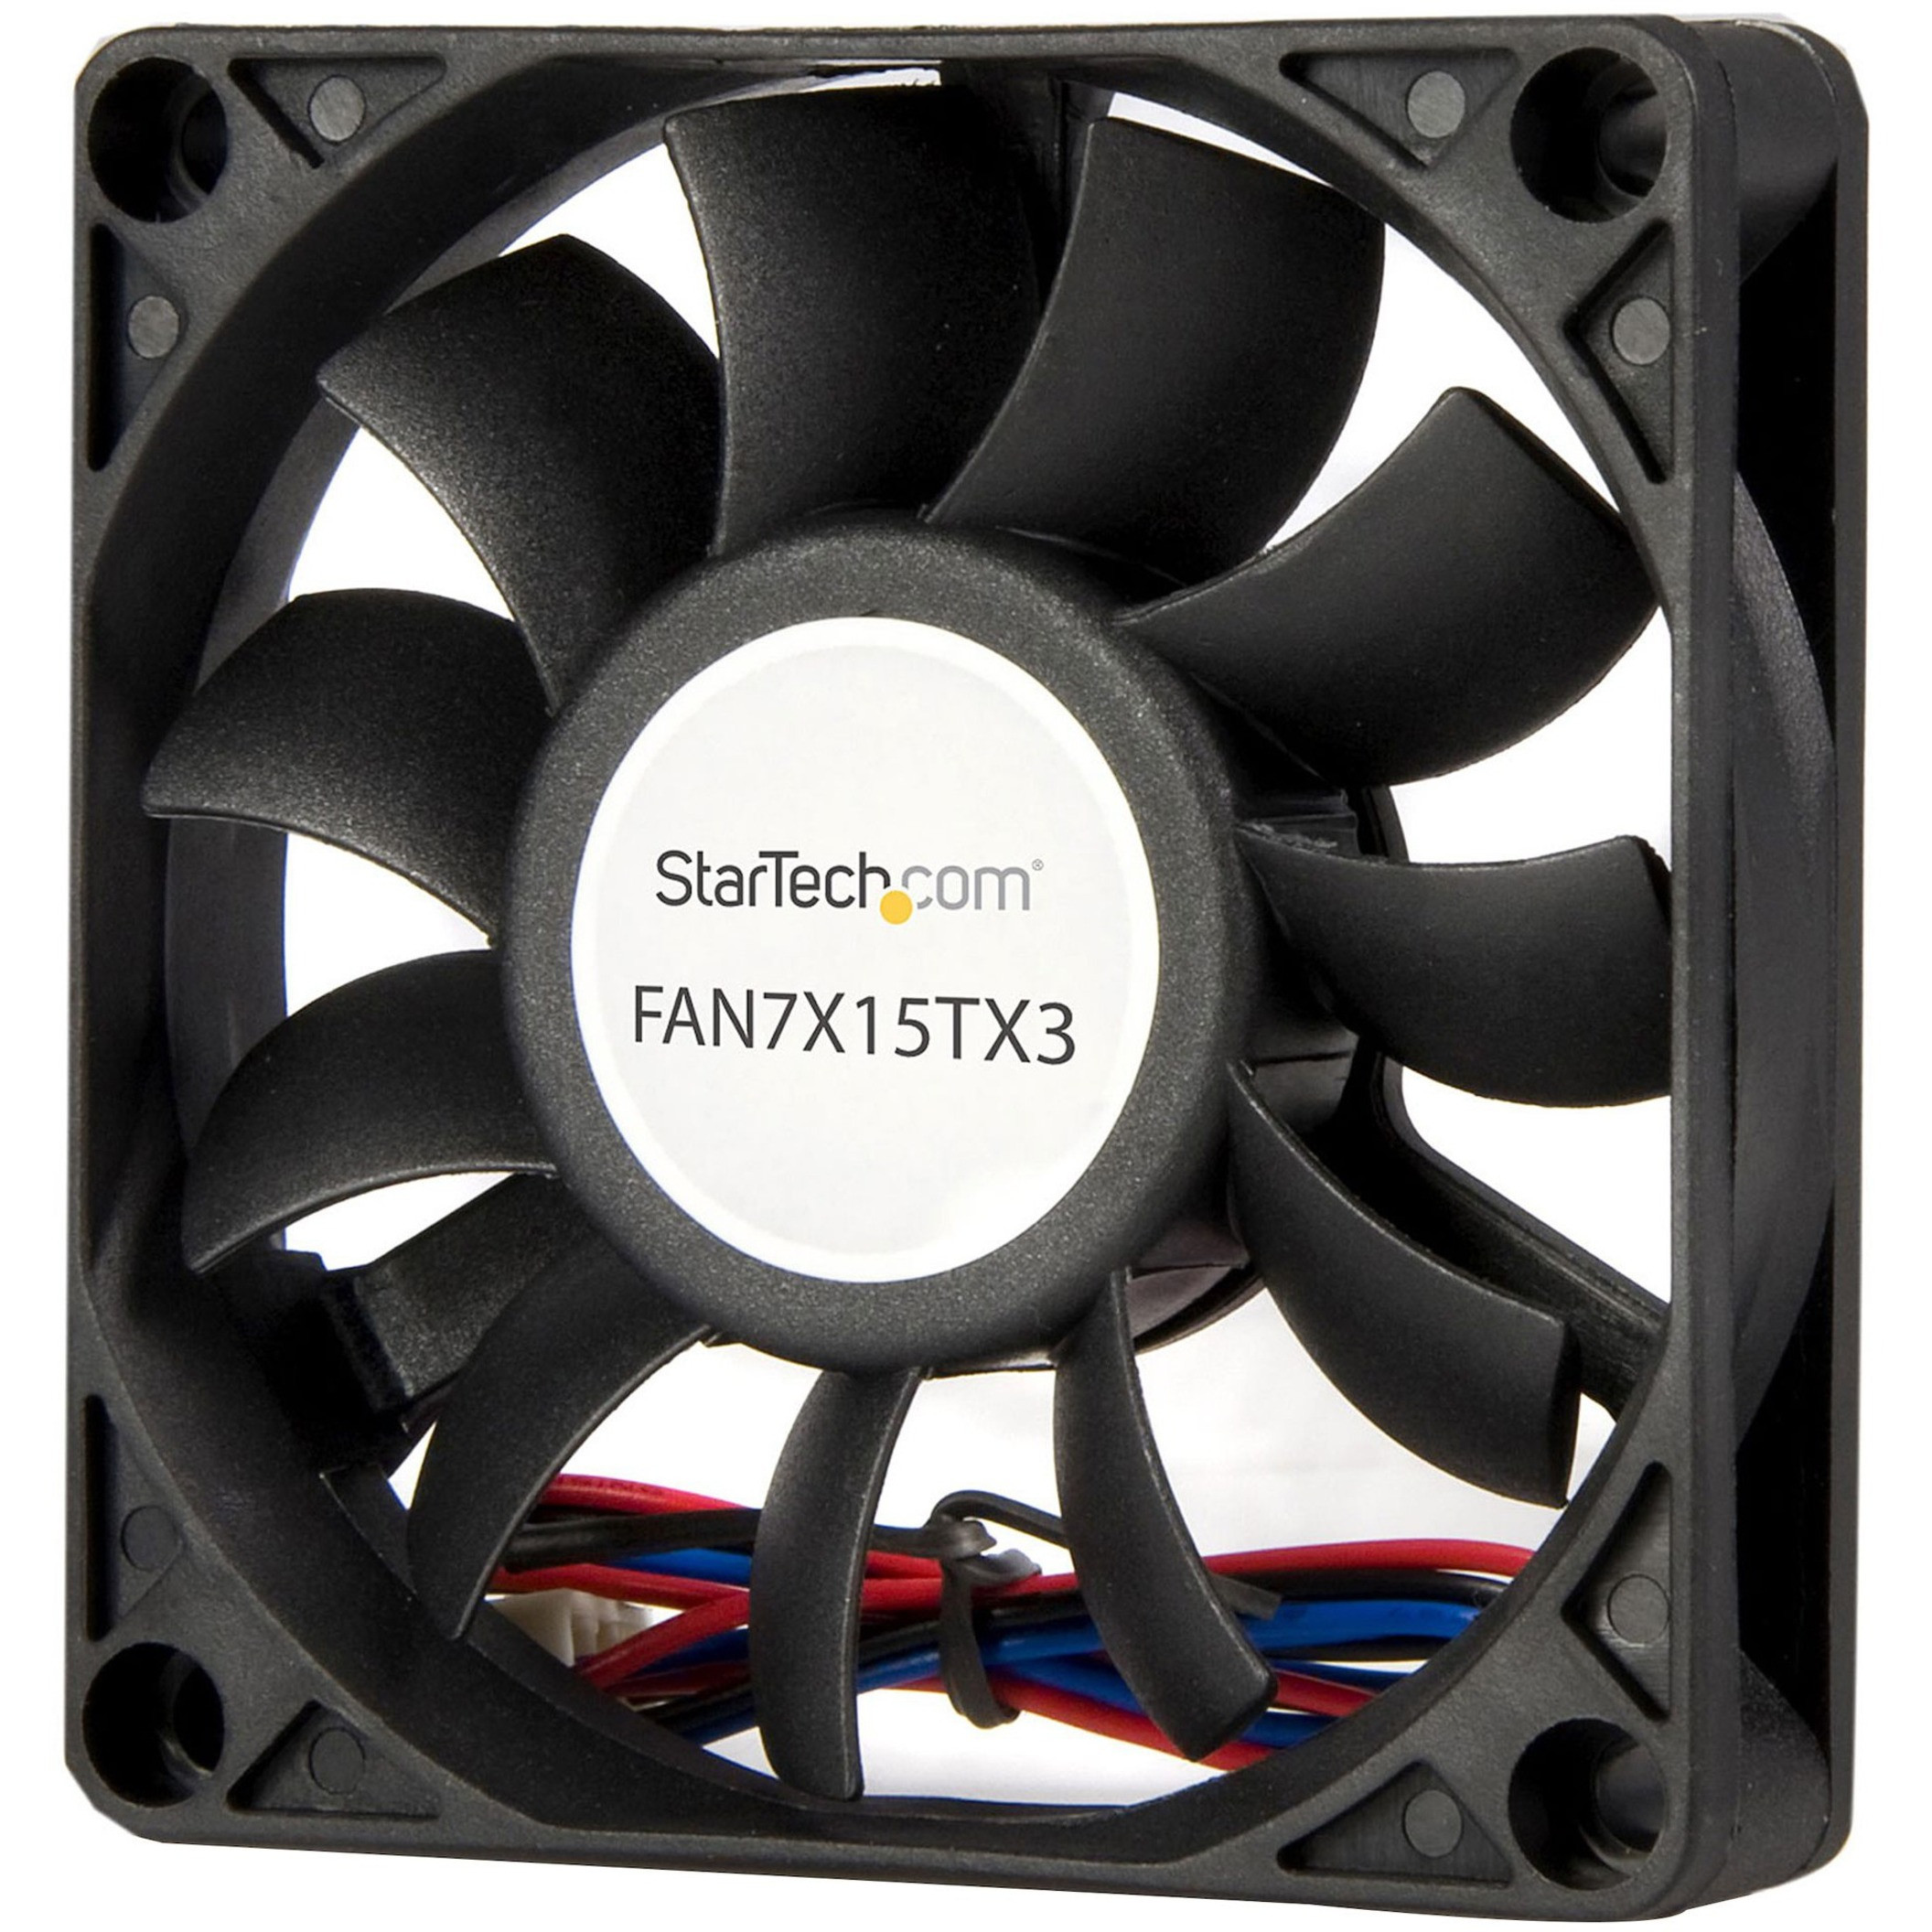 Plague Abandon Compound Startech .com Replacement 70mm Ball Bearing CPU Case FanTX3 ConnectorCase  fan70 mmblackAdd additional chassis cooling with a 70... FAN7X15TX3 -  Corporate Armor